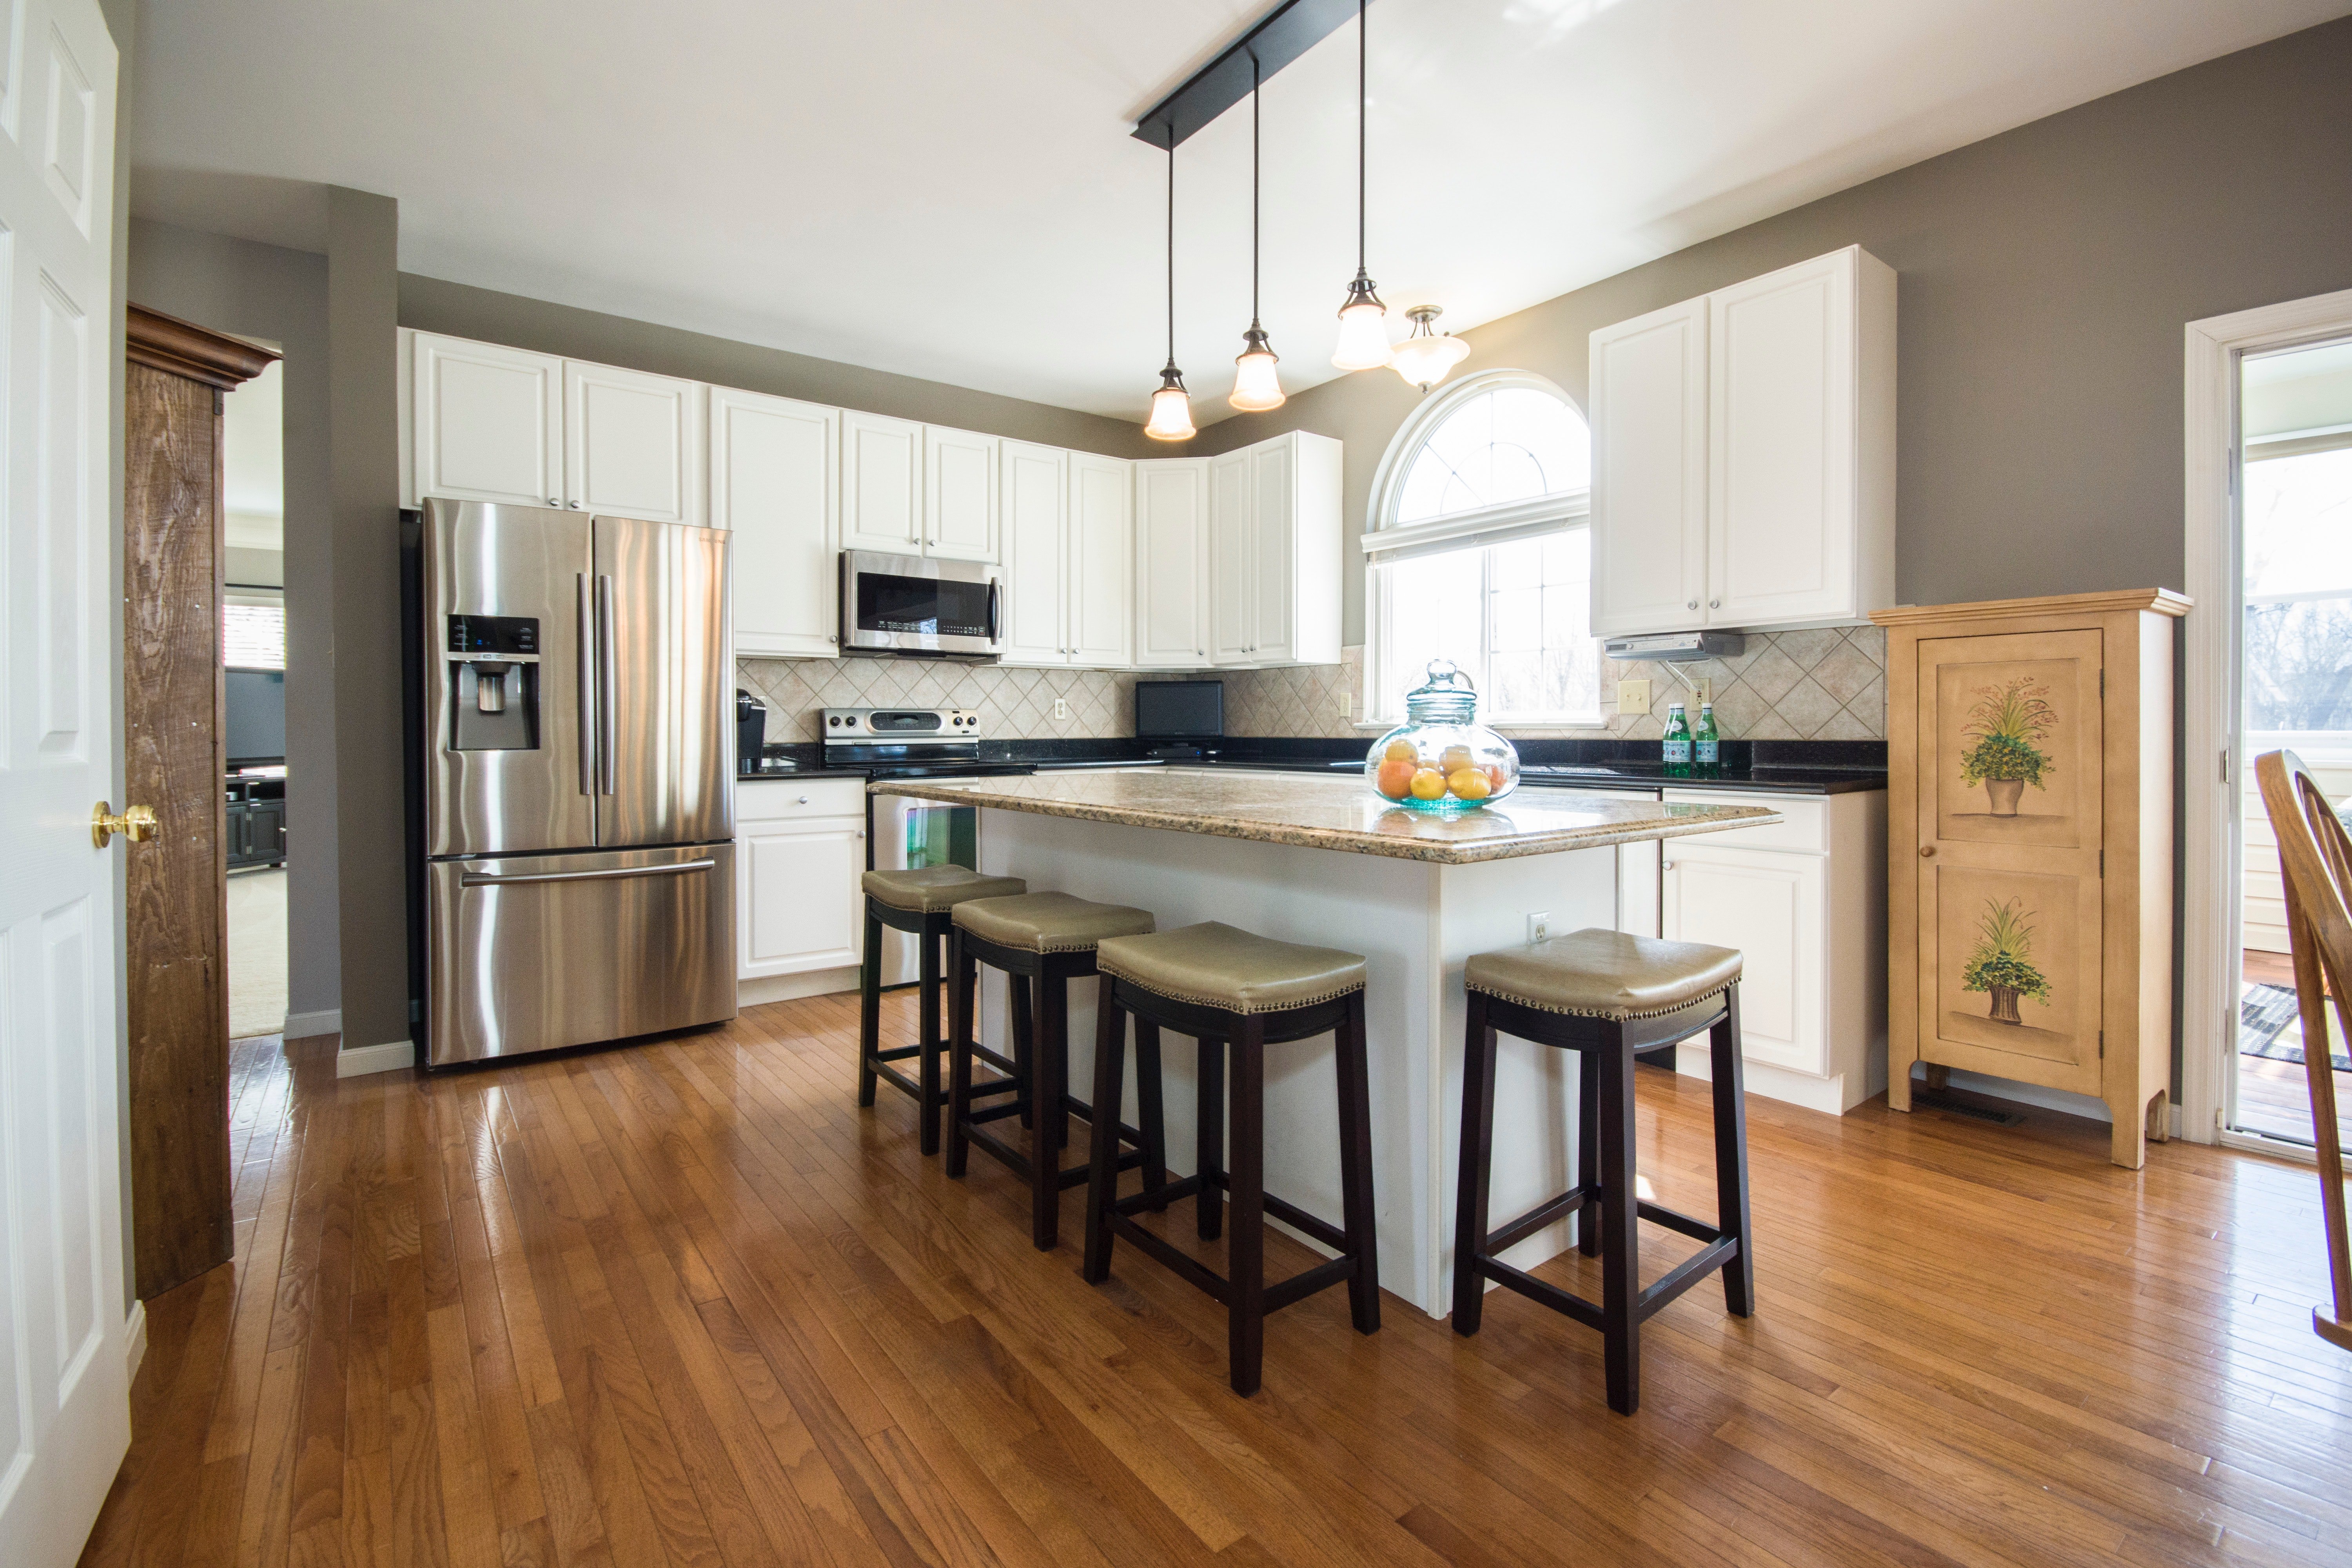 Finding A Home With The Ideal Kitchen